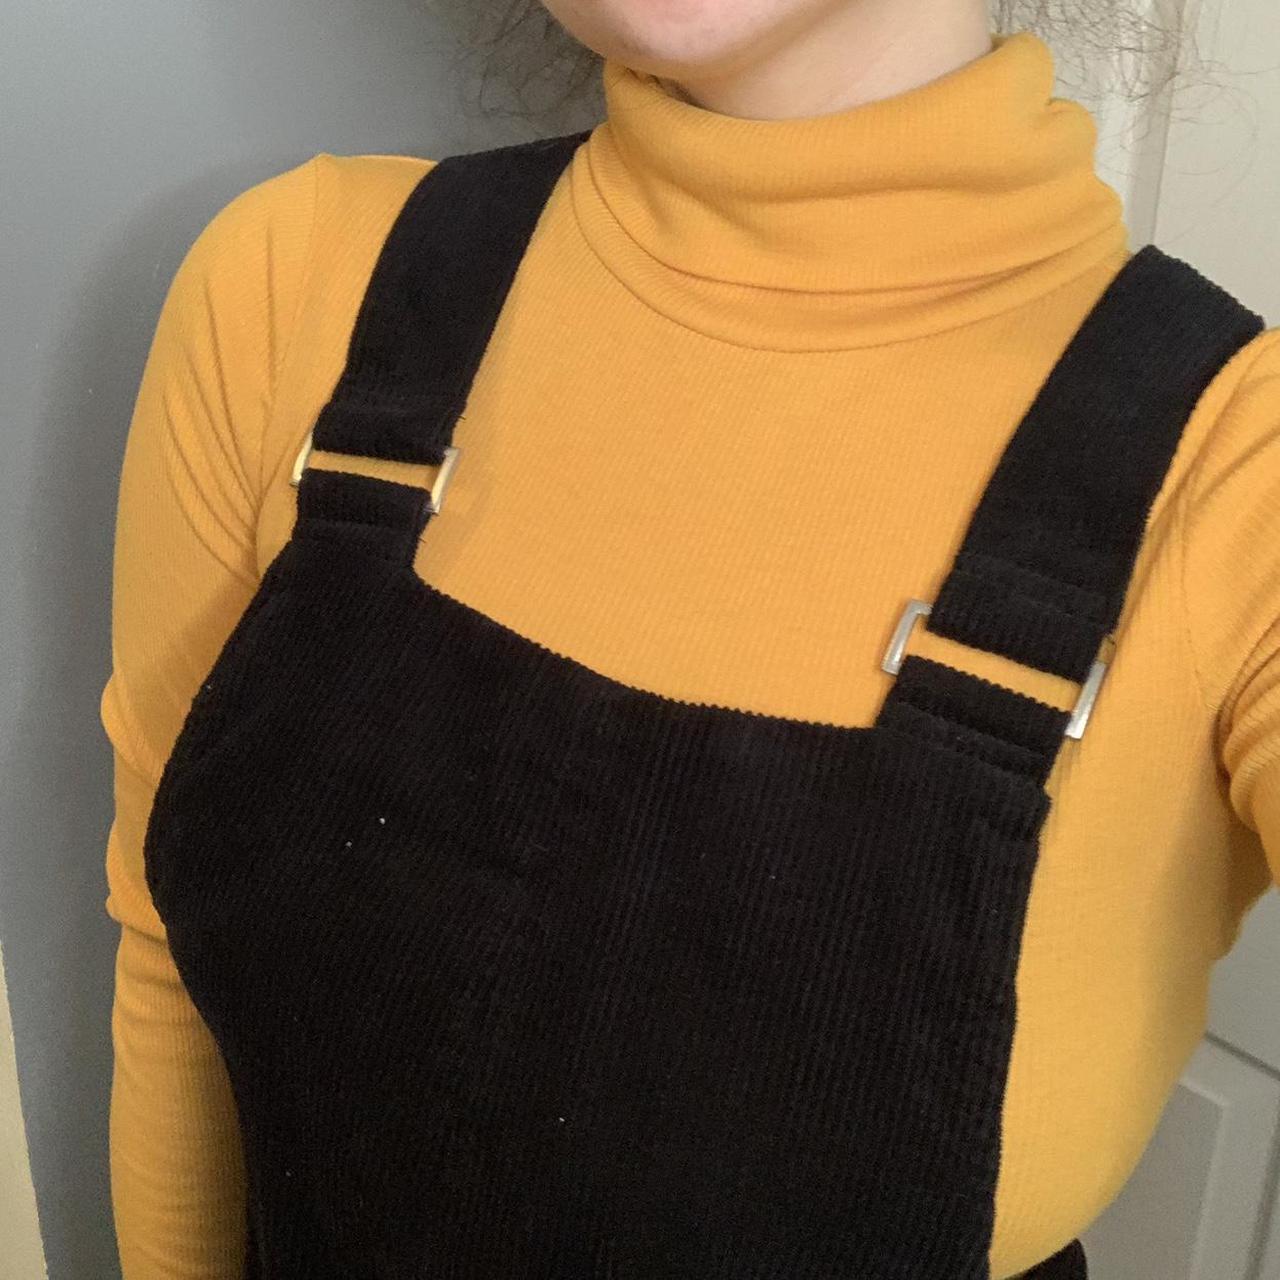 Product Image 2 - Mustard turtle neck ribbed T-shirt🍂
Brand